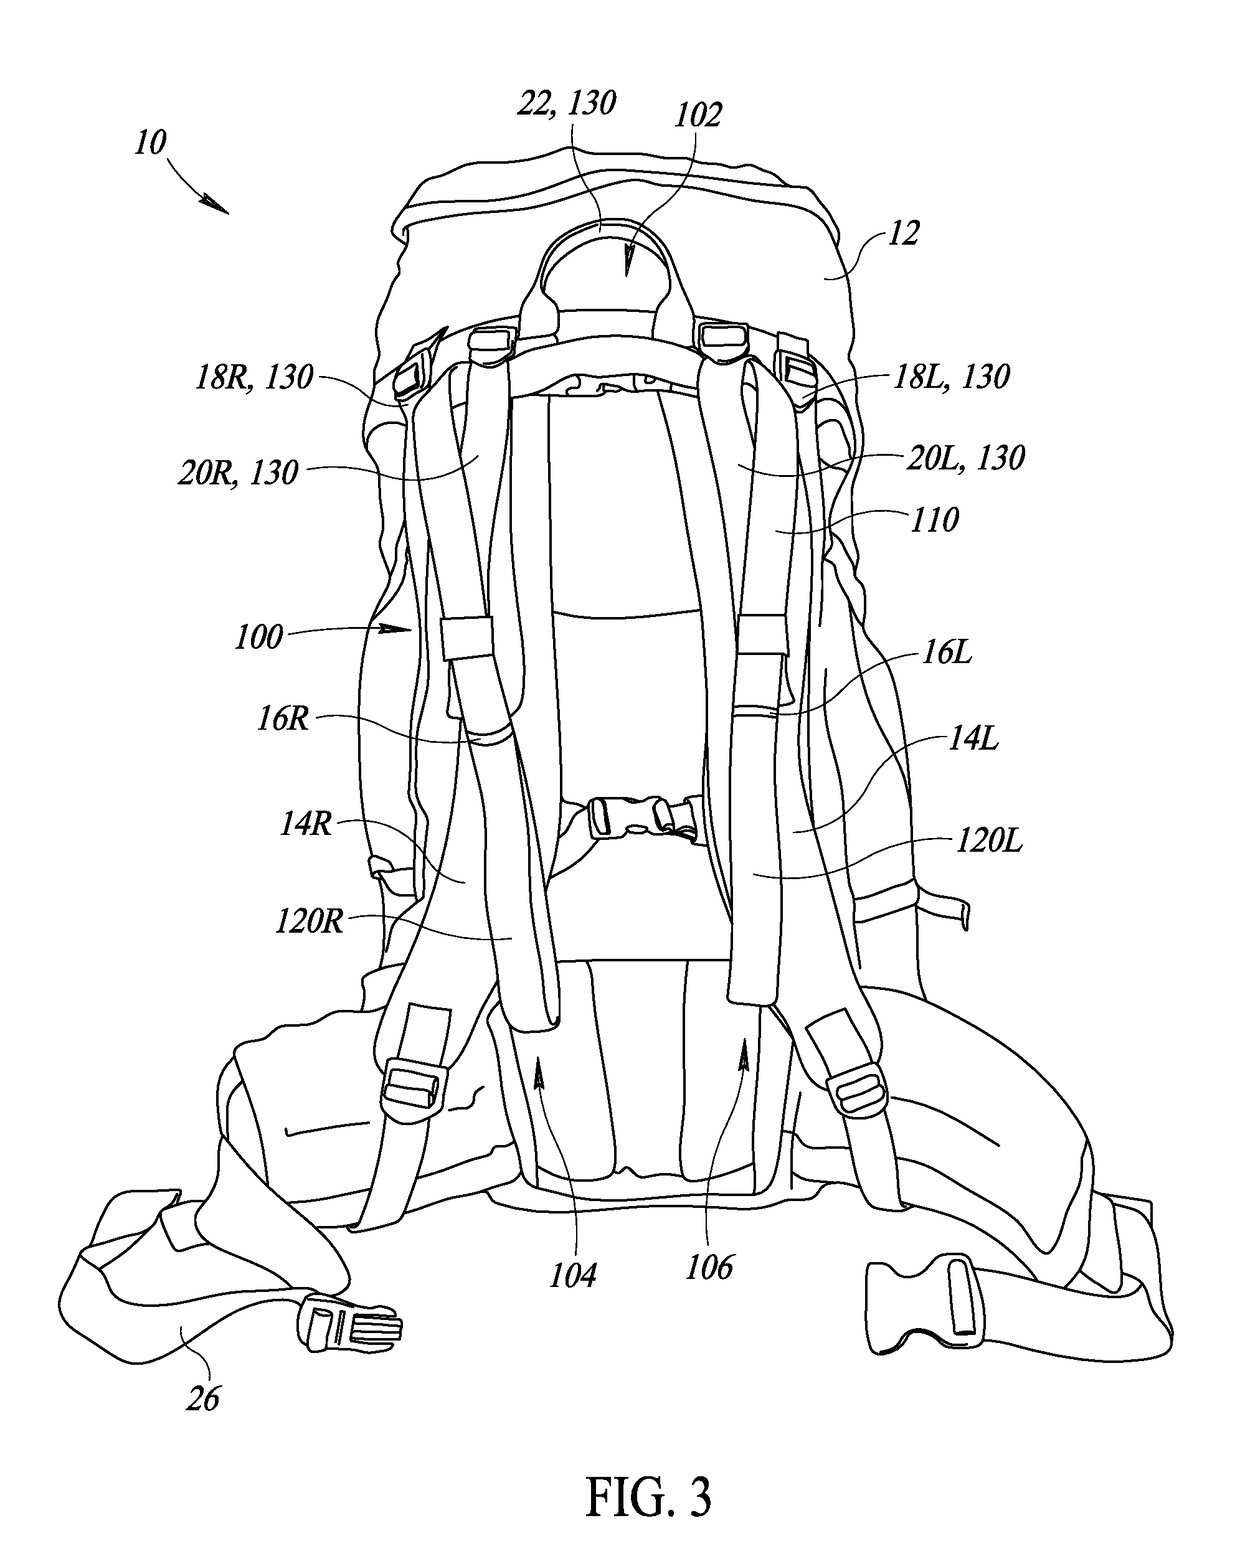 Backpack with auxiliary handholds